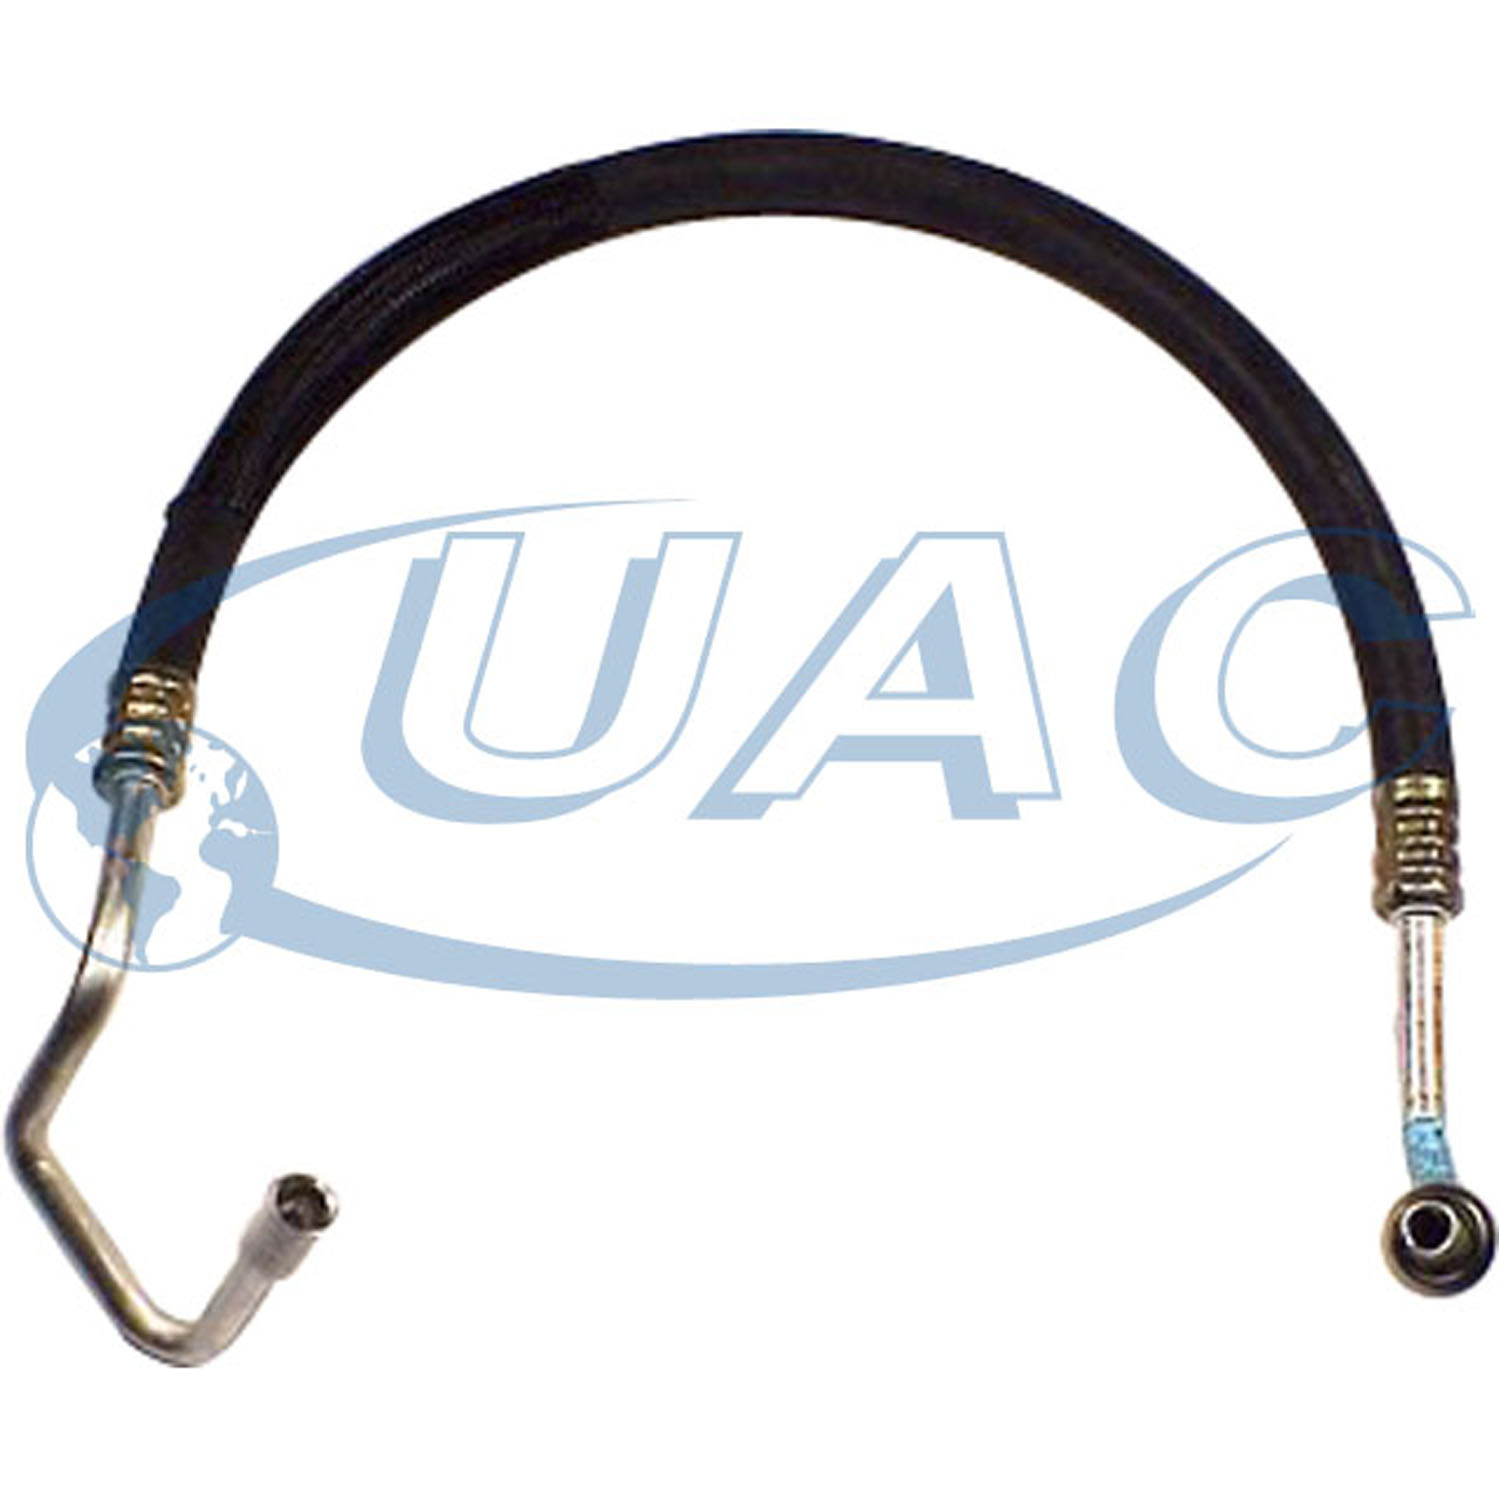 New Discharge Hose 71-10200 Product Image field_60b6a13a6e67c